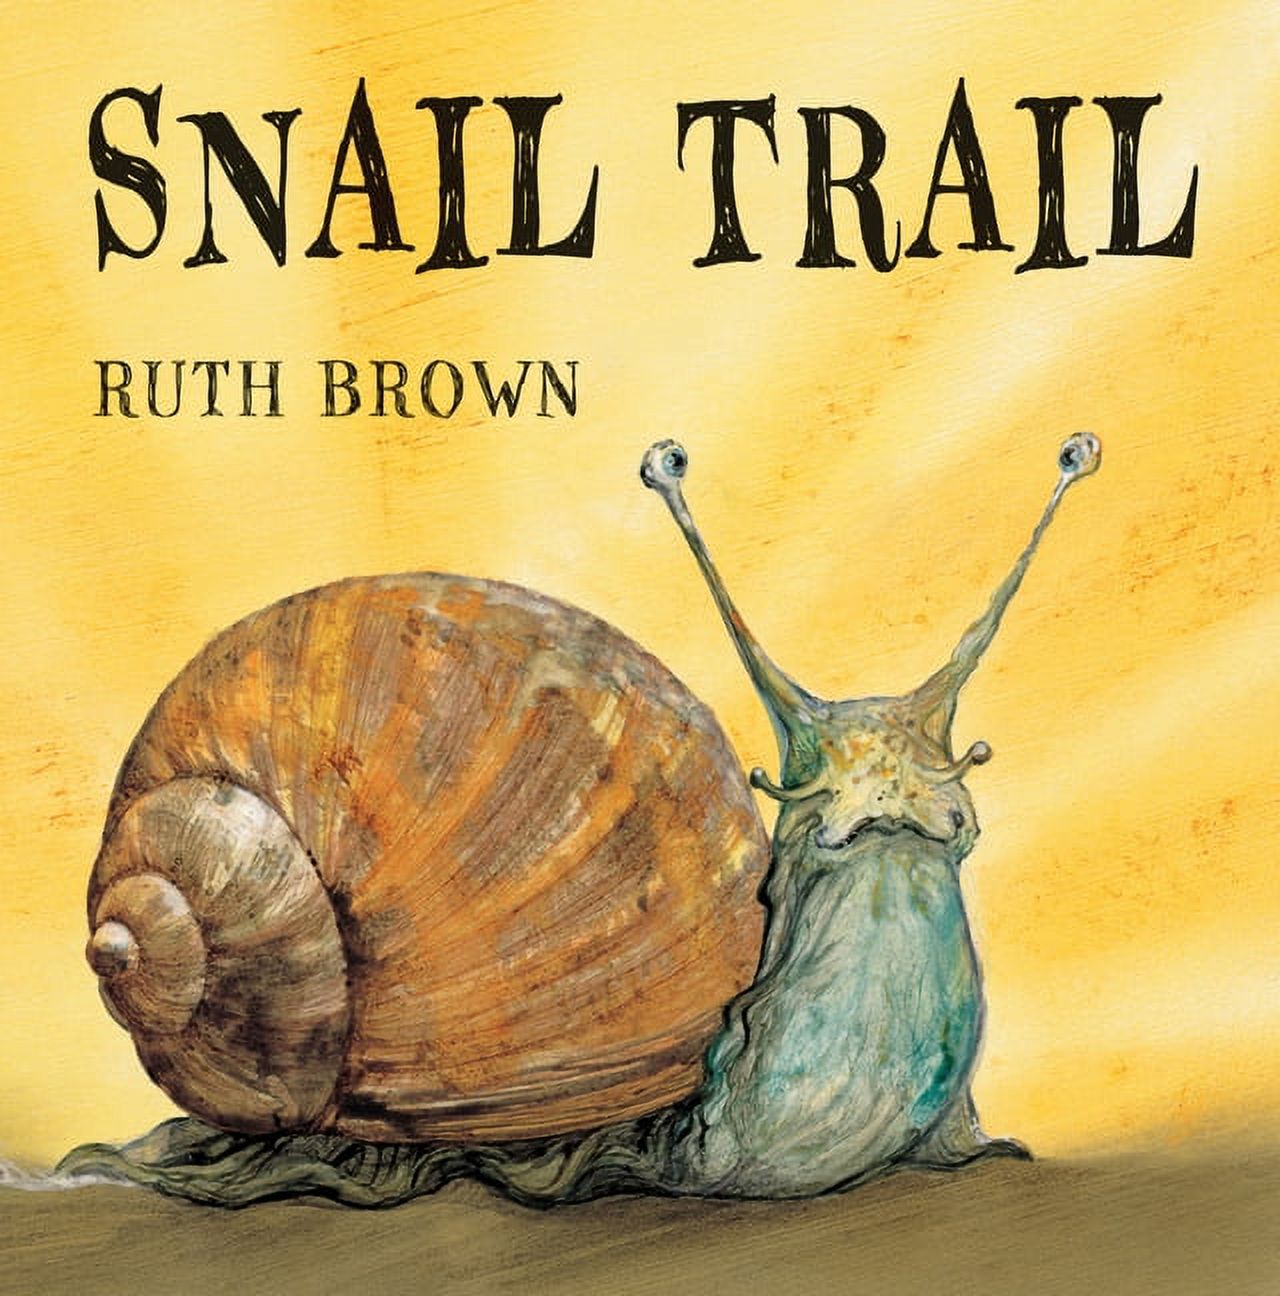 Snail Trail (Hardcover) - image 1 of 4